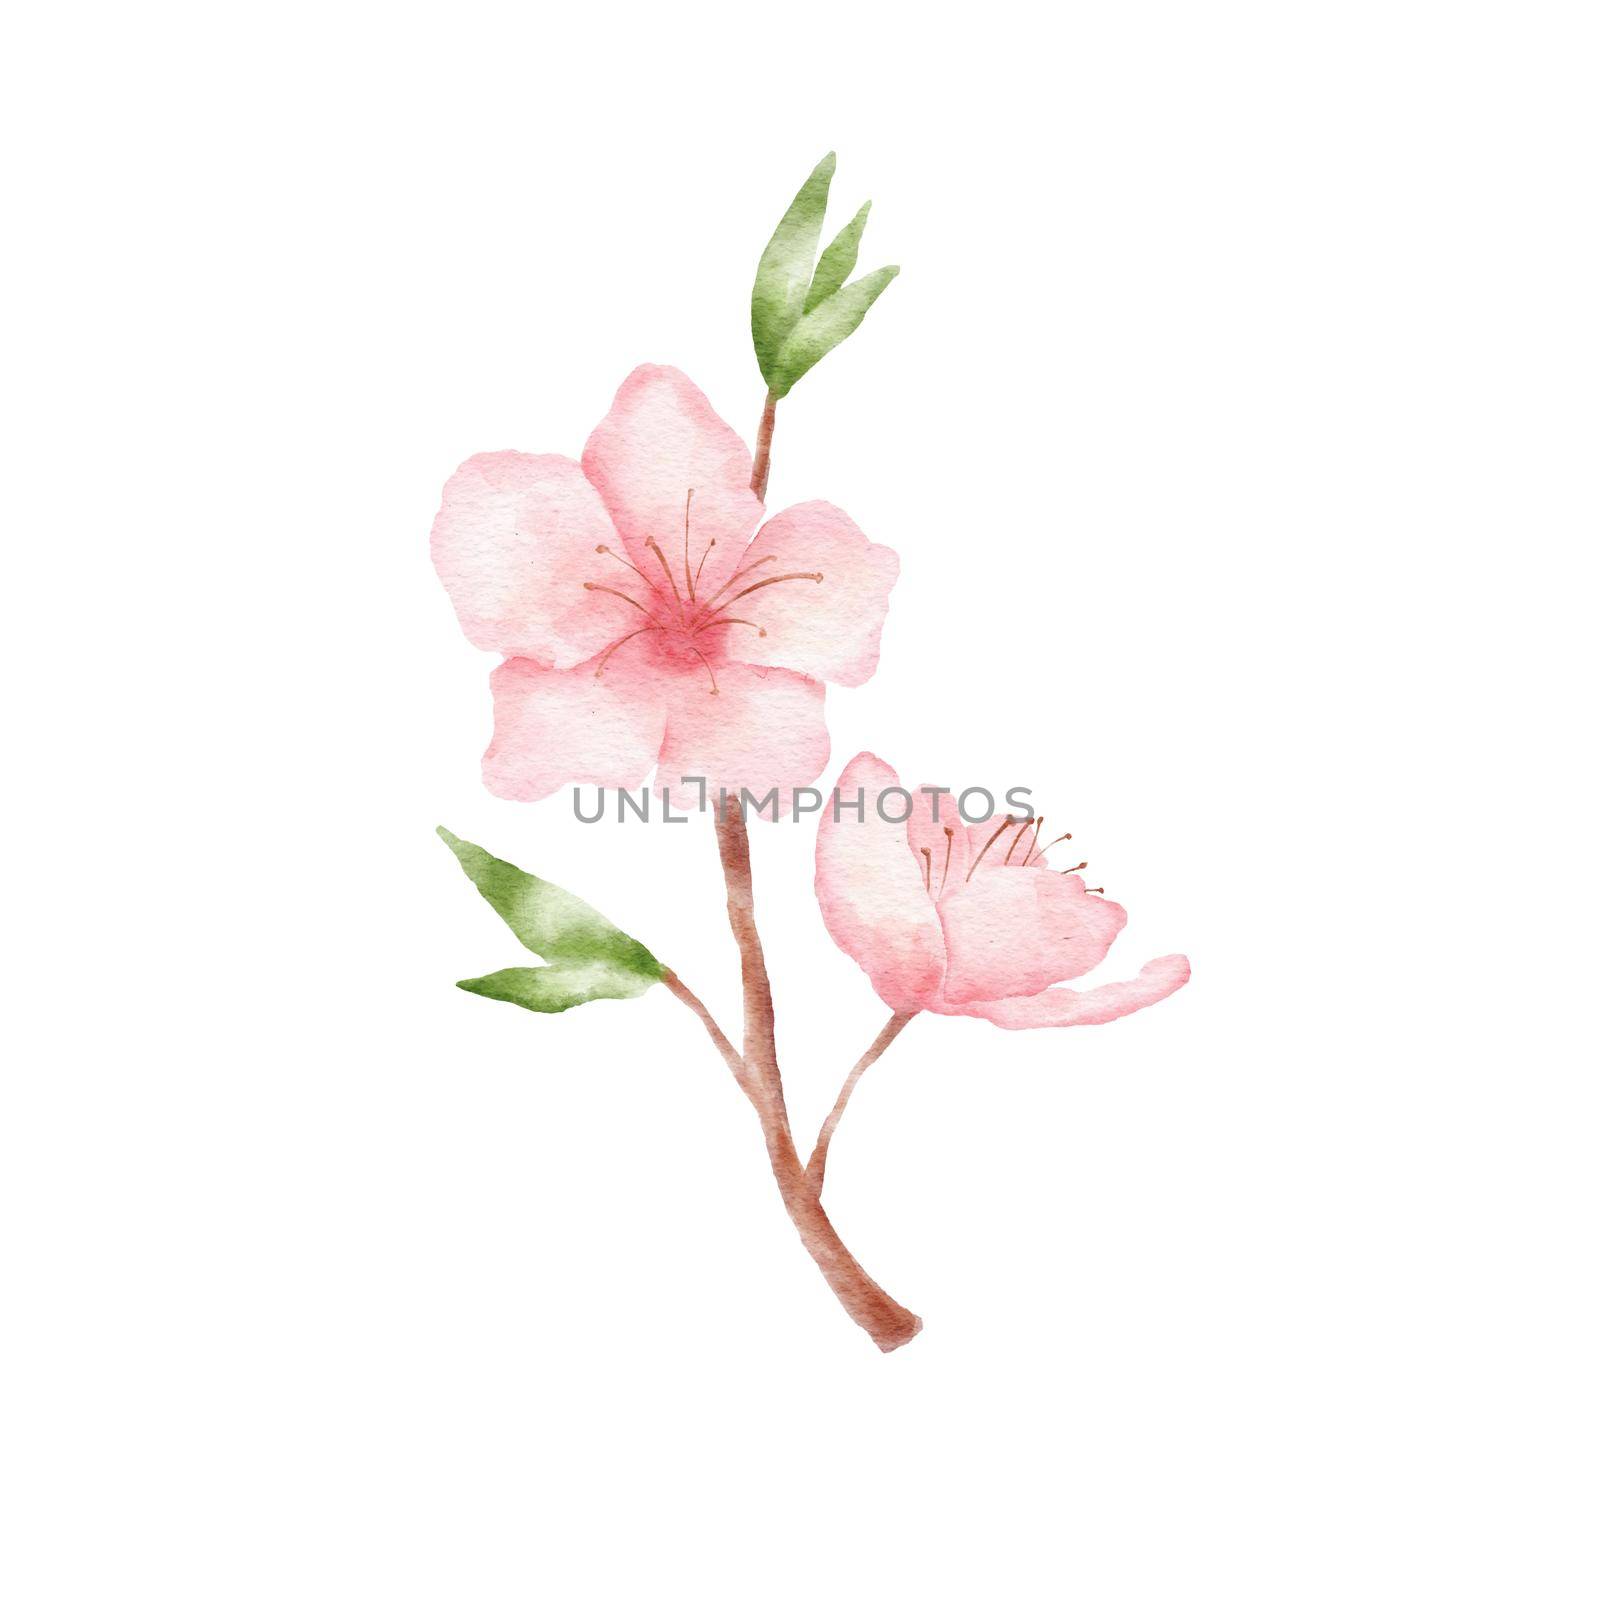 Branch of Cherry blossom illustration. Watercolor painting sakura isolated on white background. Japanese flower